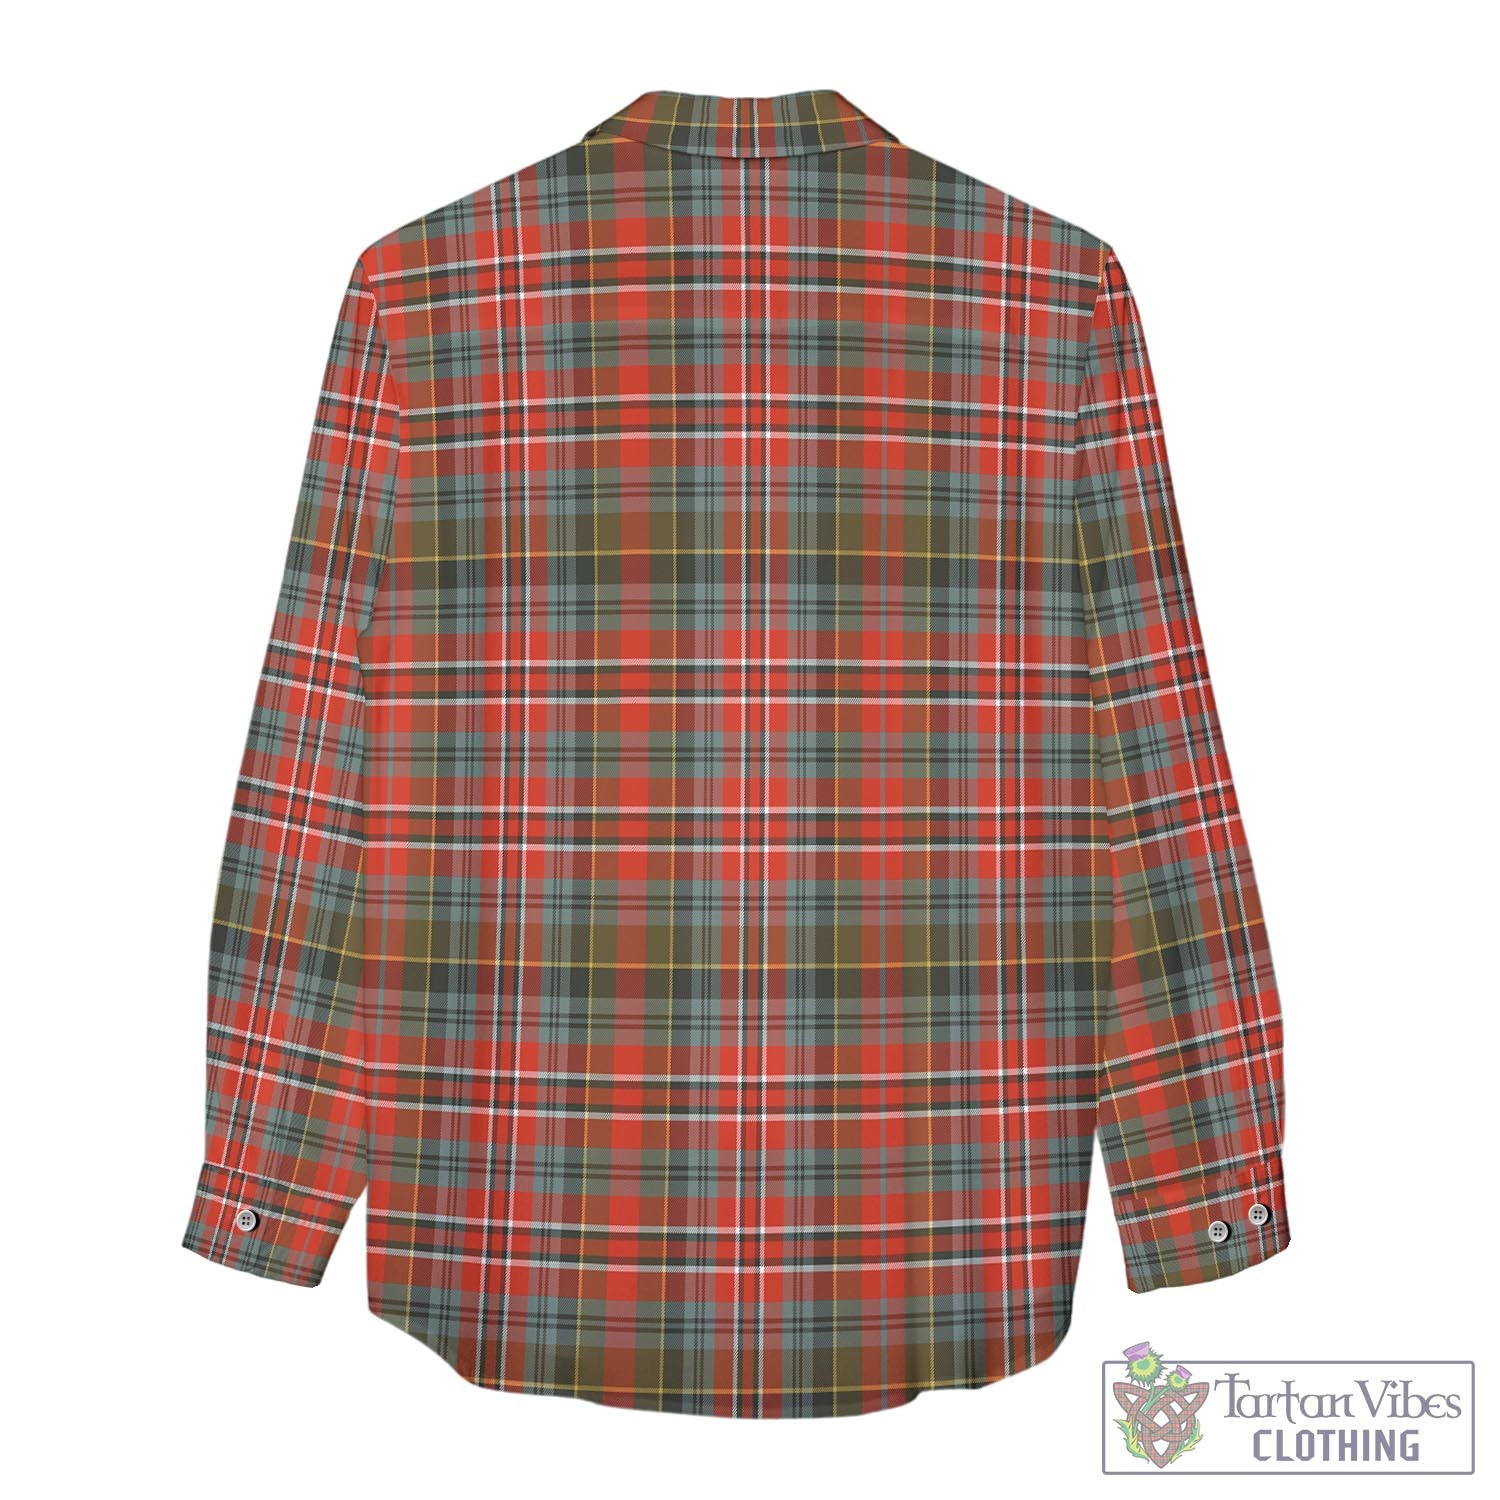 Tartan Vibes Clothing MacPherson Weathered Tartan Womens Casual Shirt with Family Crest